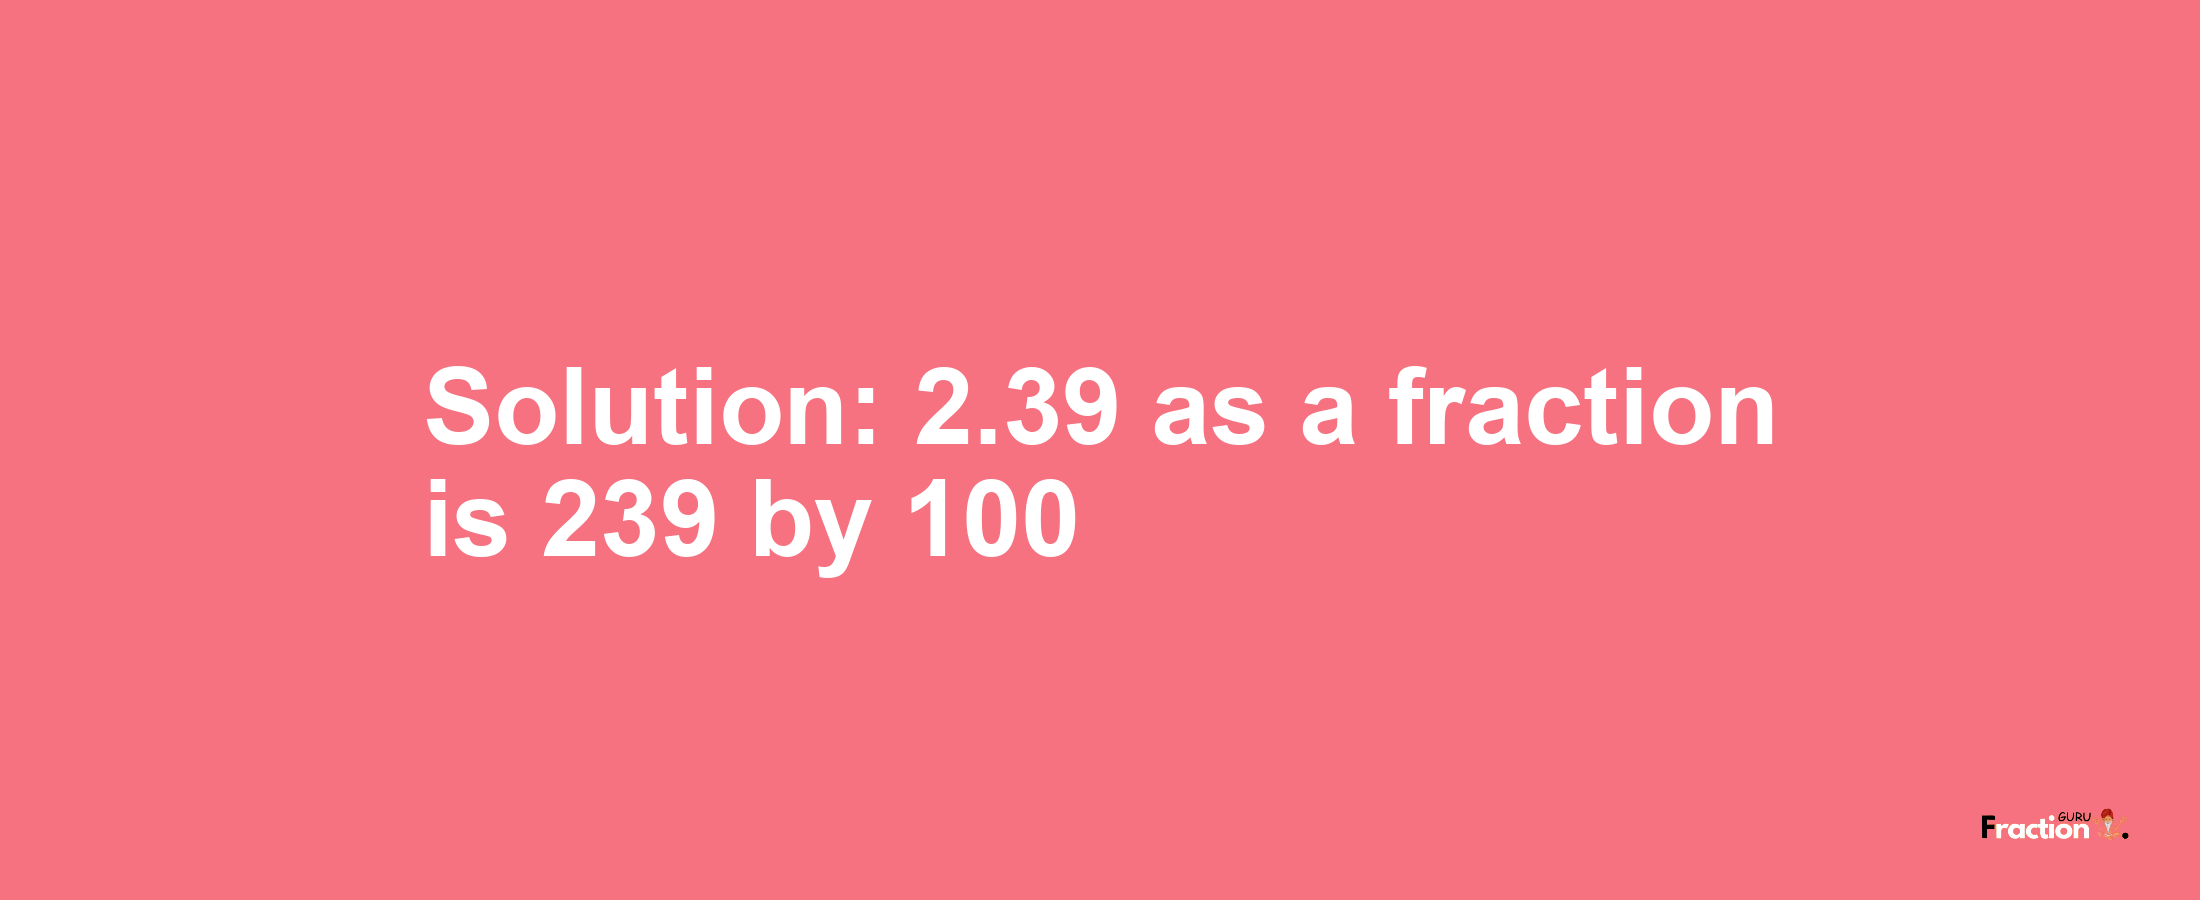 Solution:2.39 as a fraction is 239/100